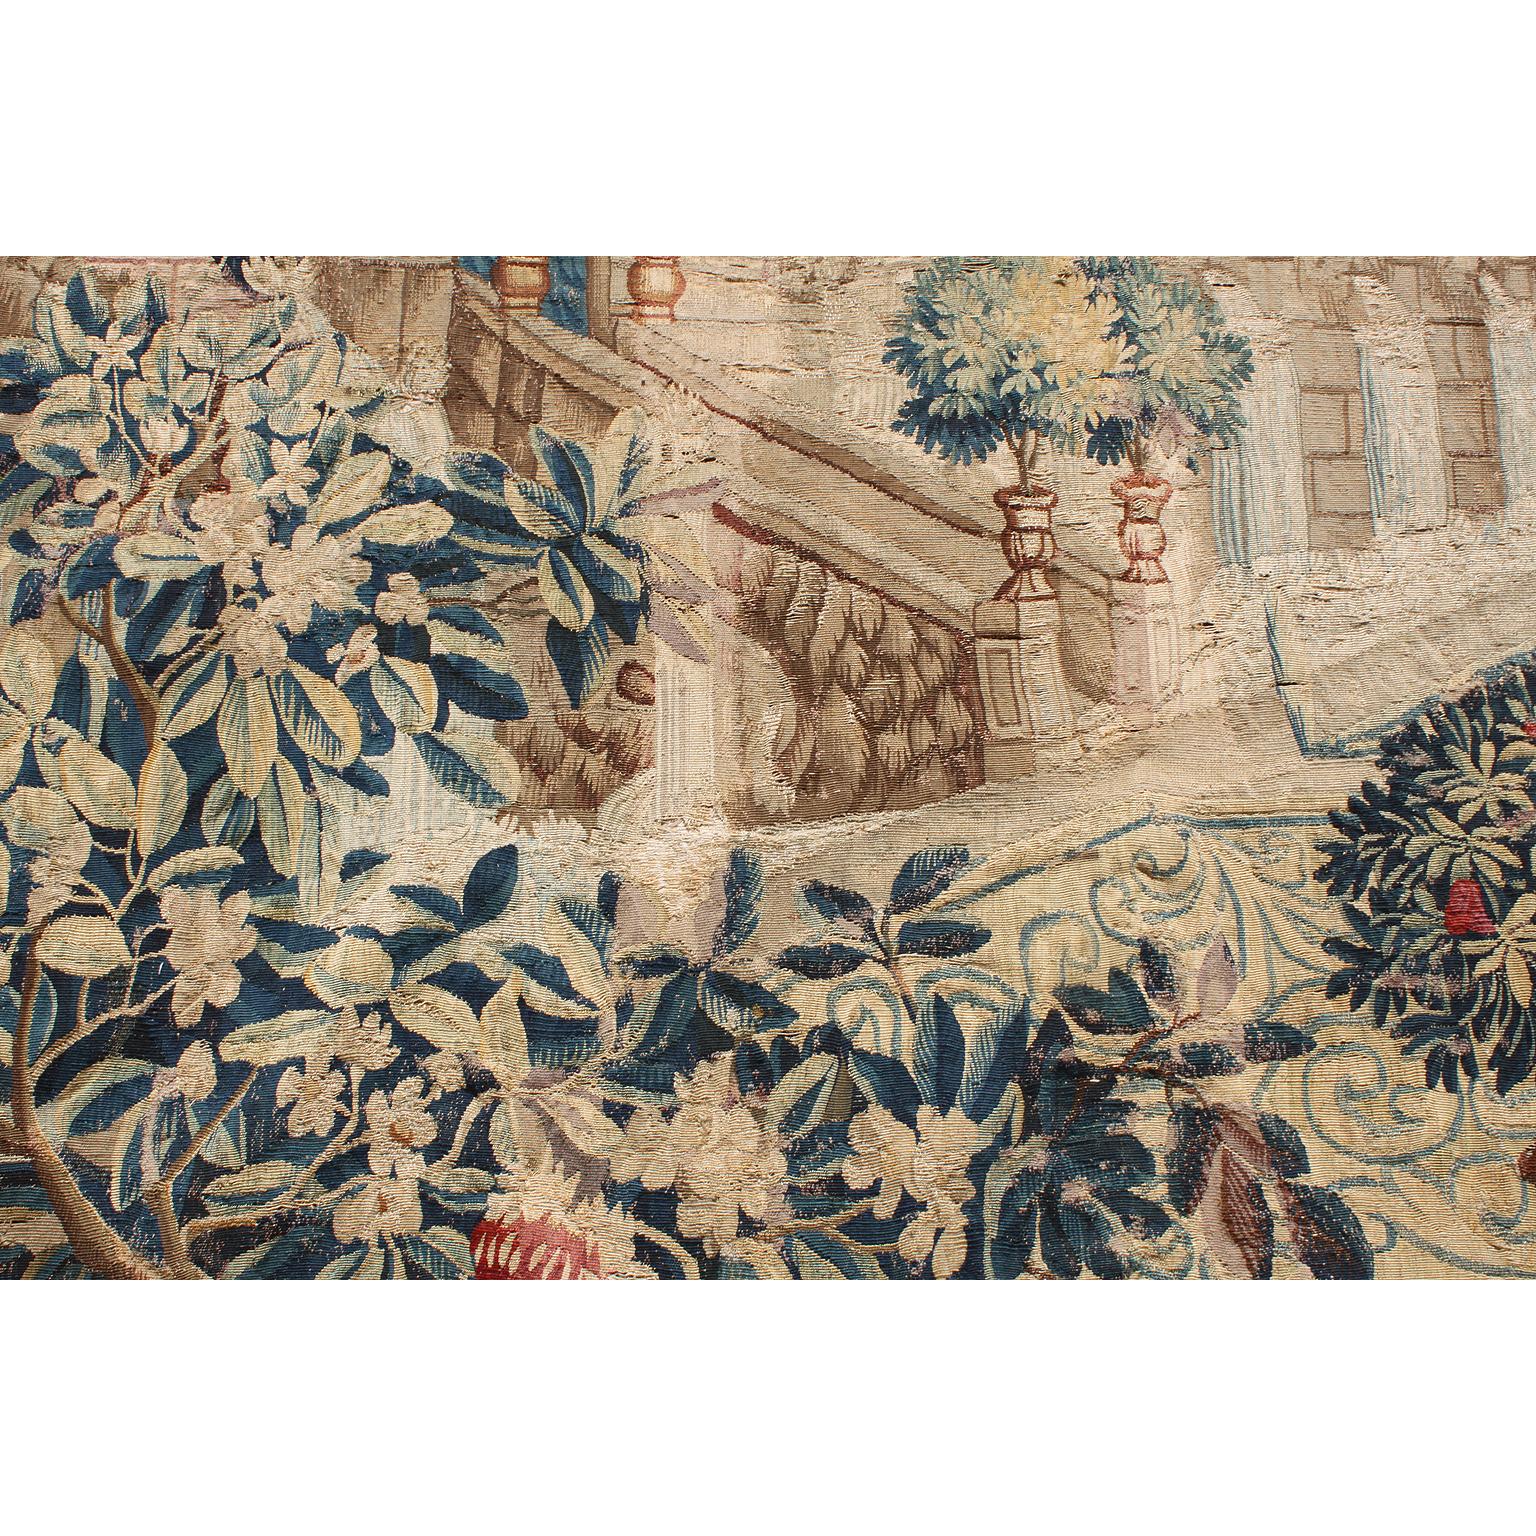 Wool Large Flemish 17th-18th Century Baroque Pictorial Tapestry 